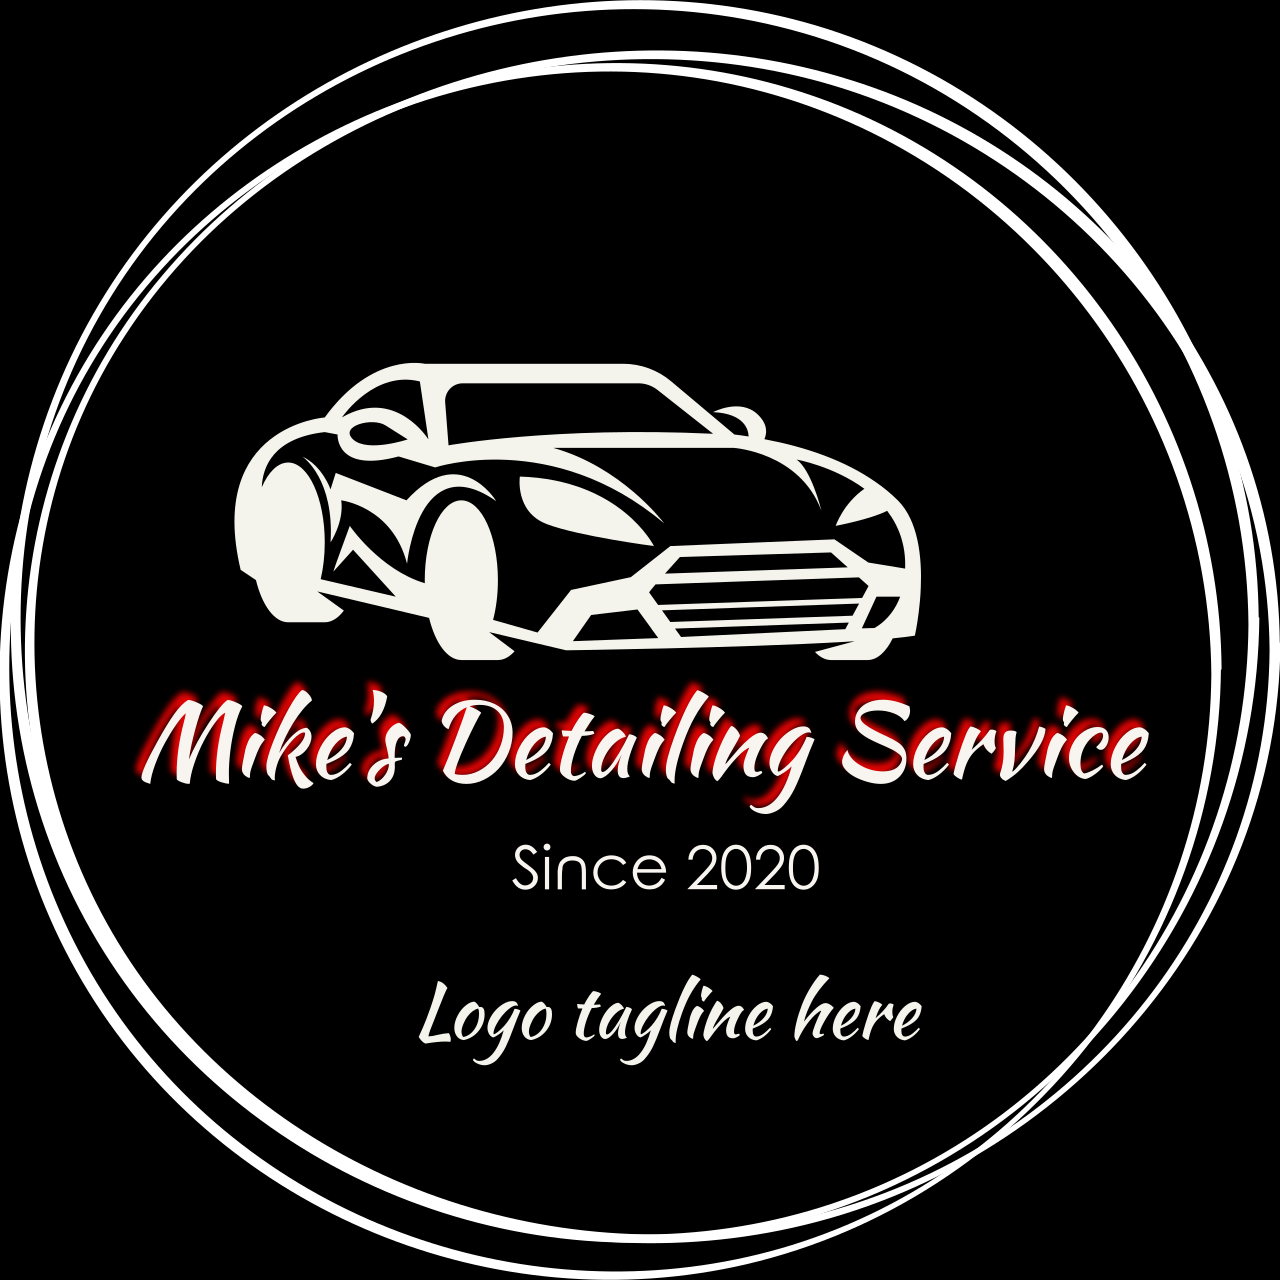 Mike's Detailing Service's web page